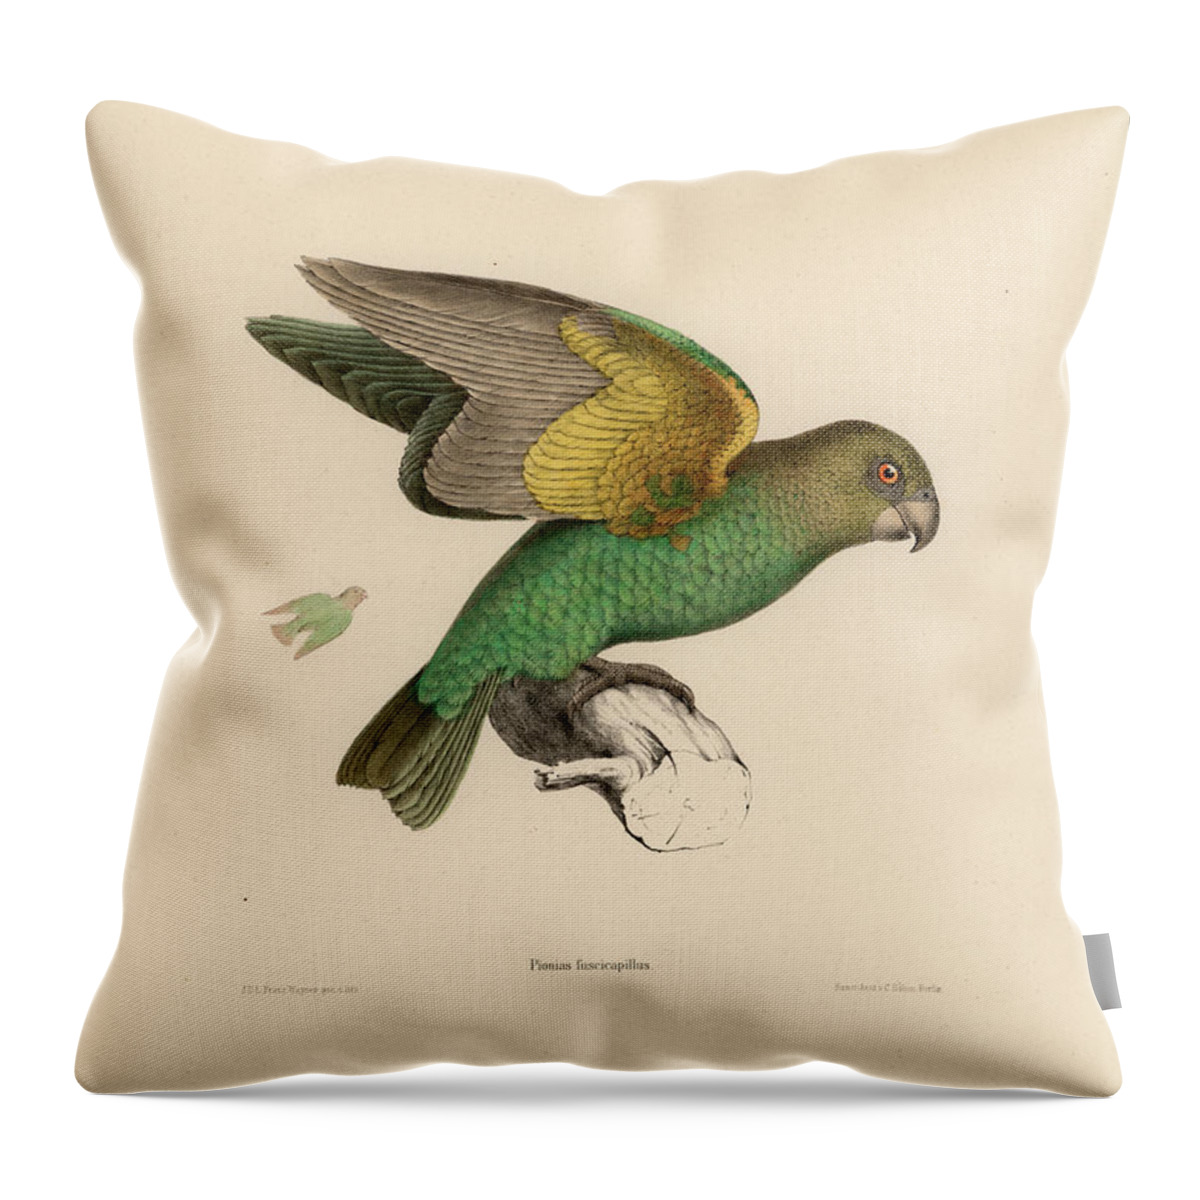 Brown-headed Parrot Throw Pillow featuring the drawing Brown-headed Parrot, Piocephalus cryptoxanthus by J D L Franz Wagner